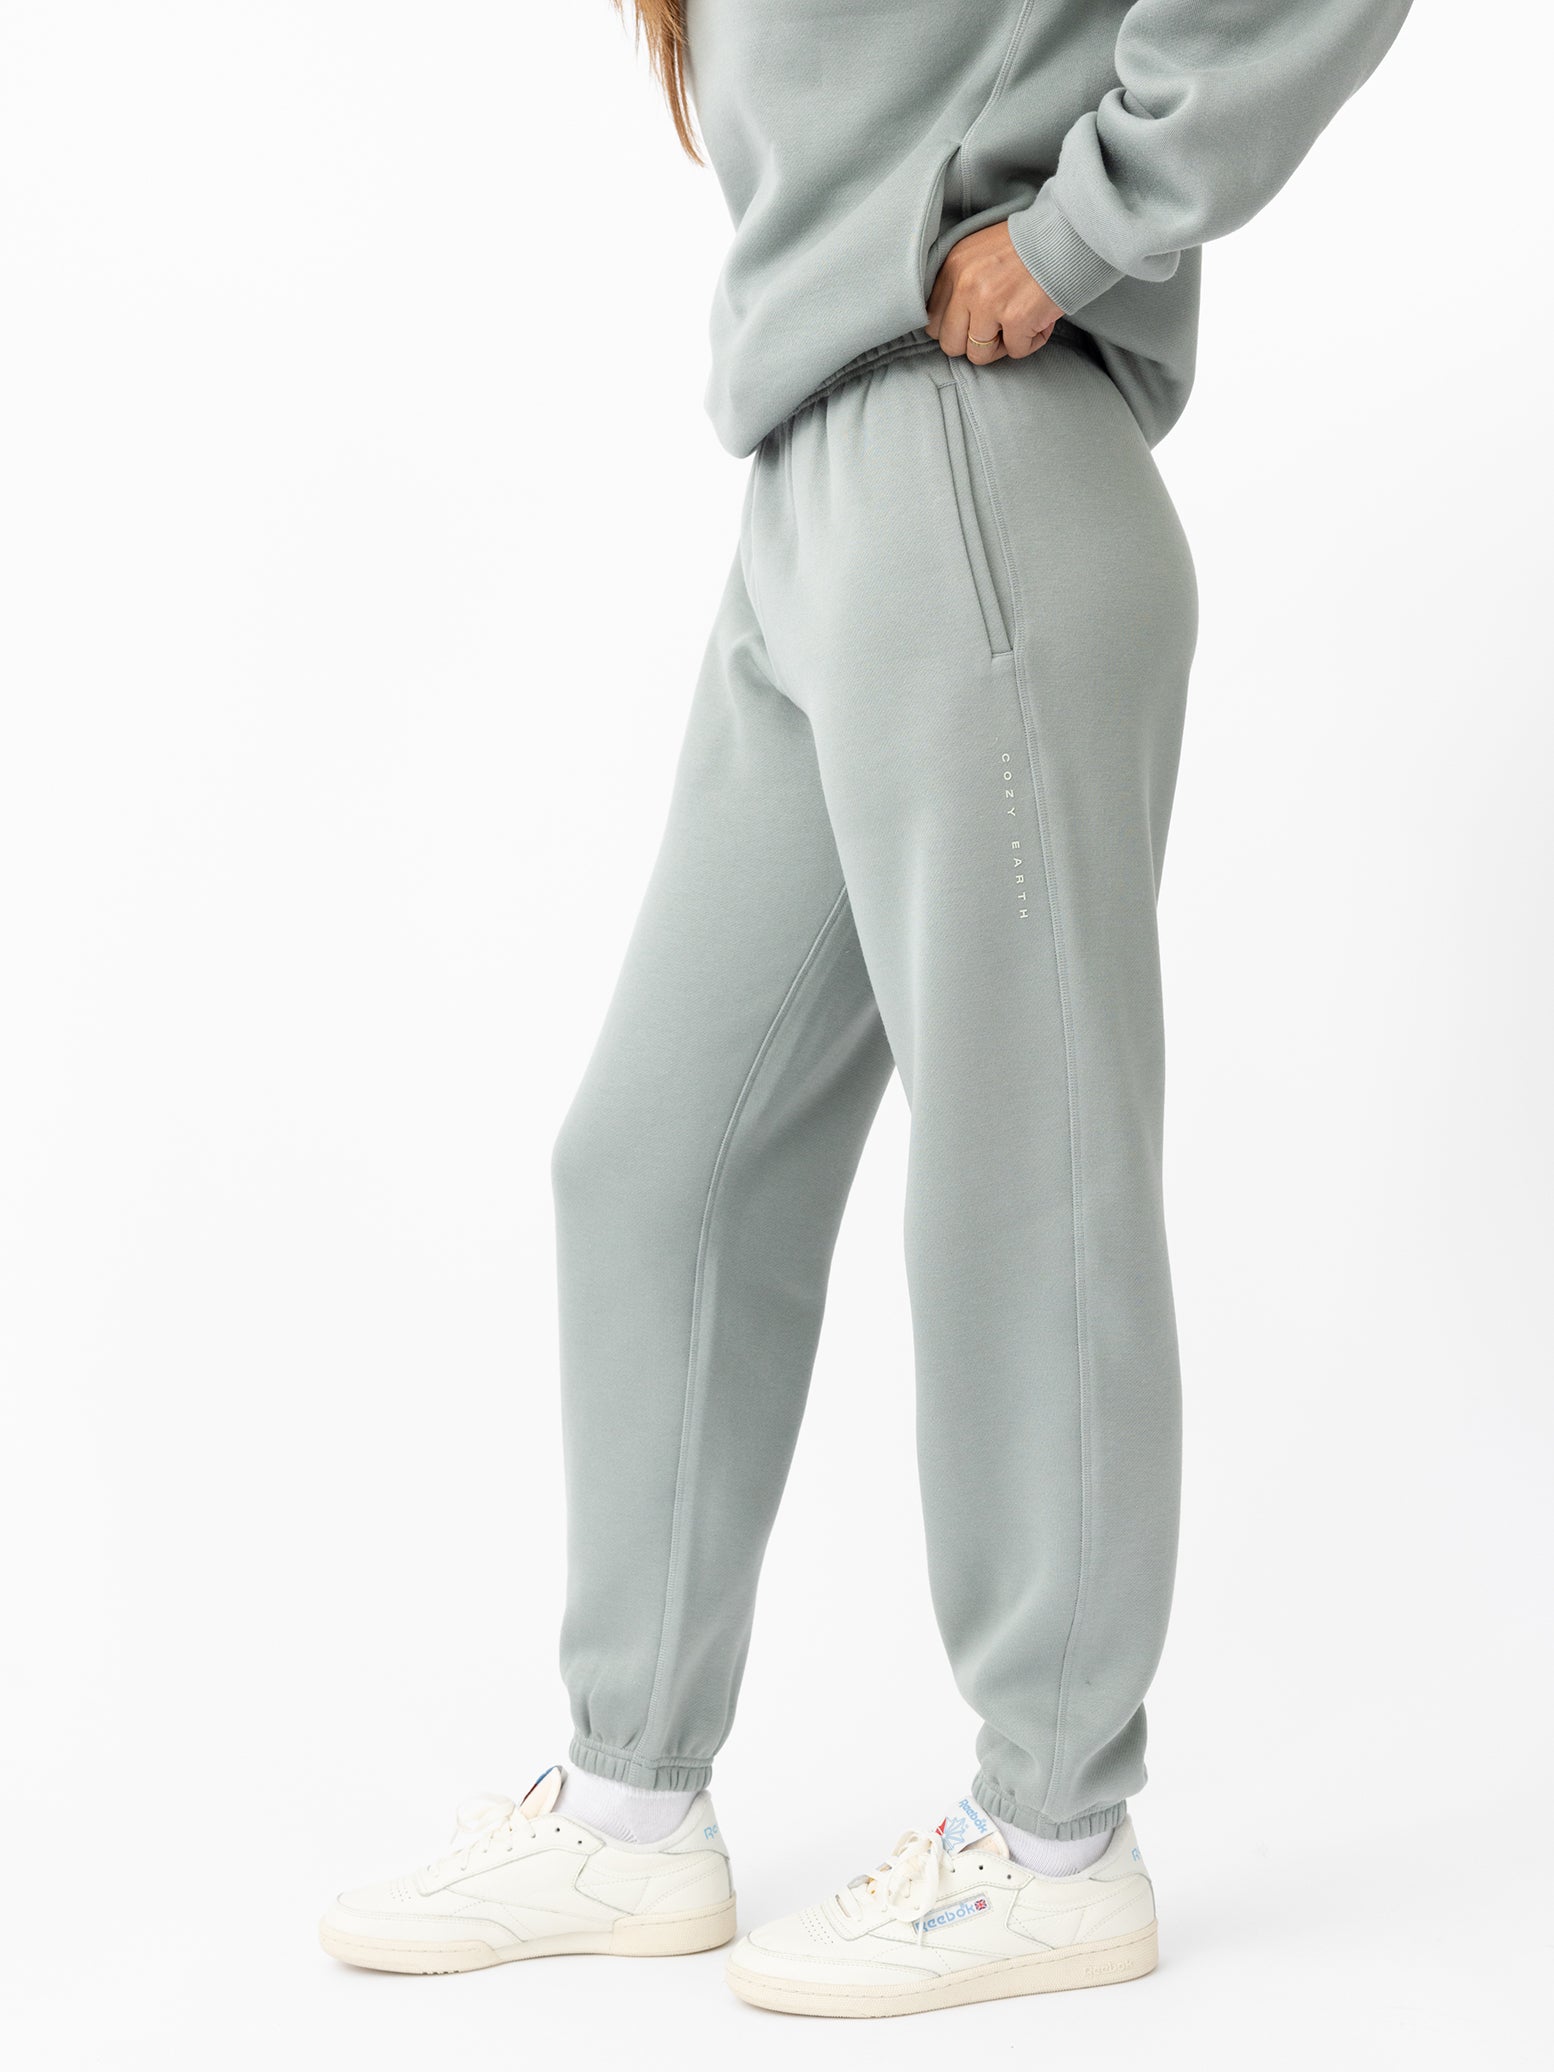 Haze CityScape Joggers. The Joggers are being worn by a female model. The photo is taken from the waist down with the models hand by the pocket of the joggers. The back ground is white. 